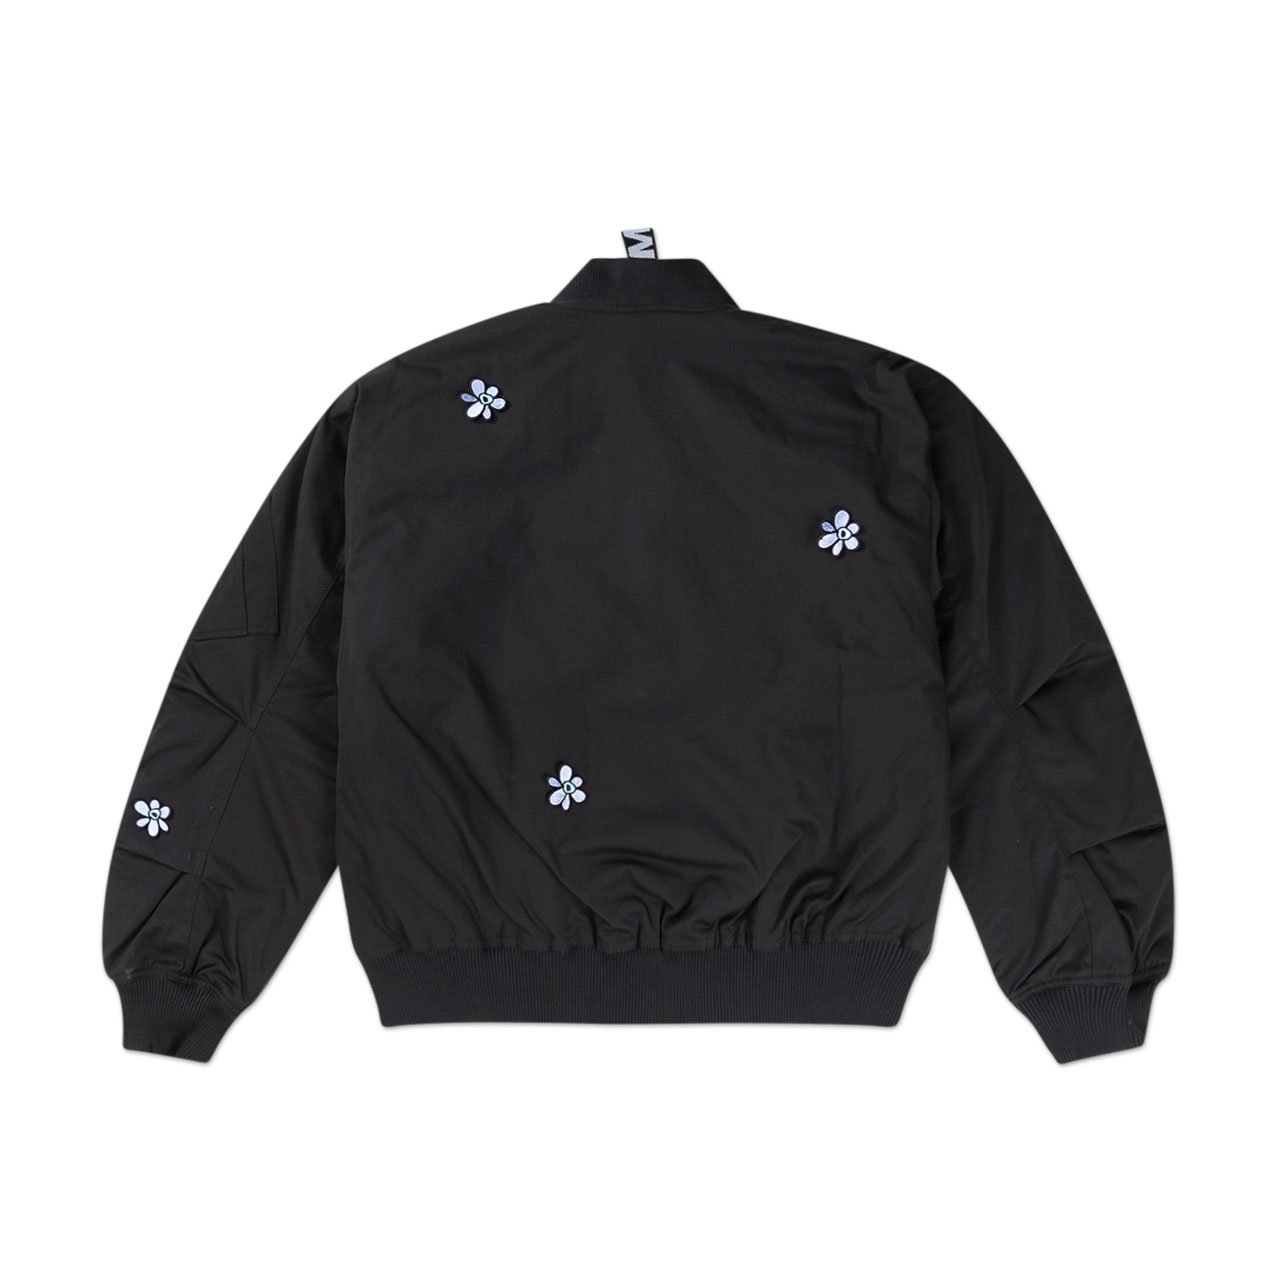 perks and mini emerging gestures bomber (black) - 39101-b - a.plus - Image - 2